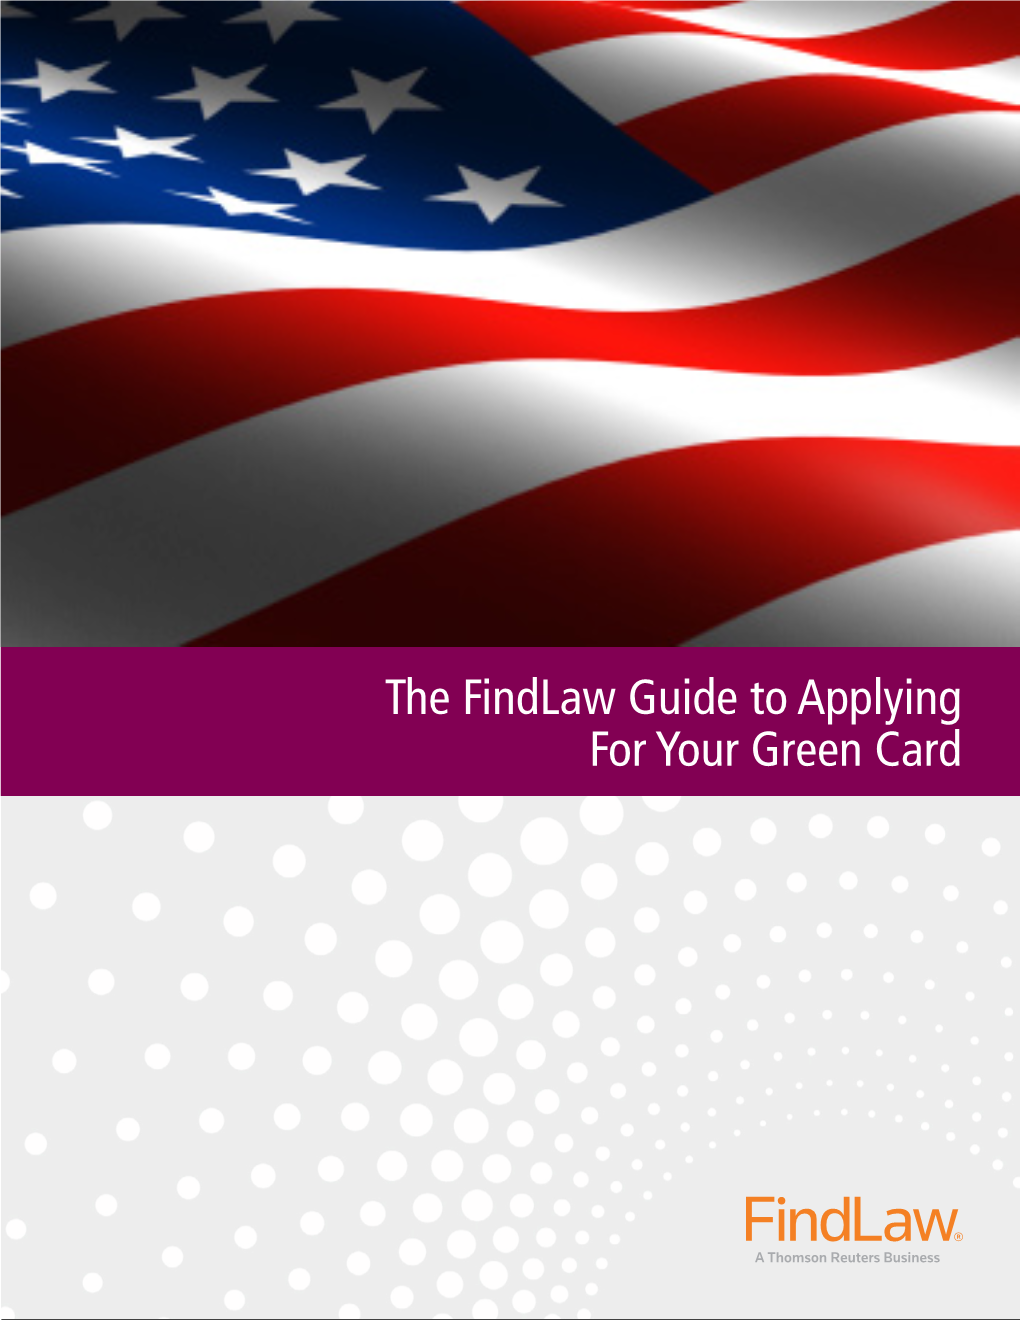 The Findlaw Guide to Applying for Your Green Card